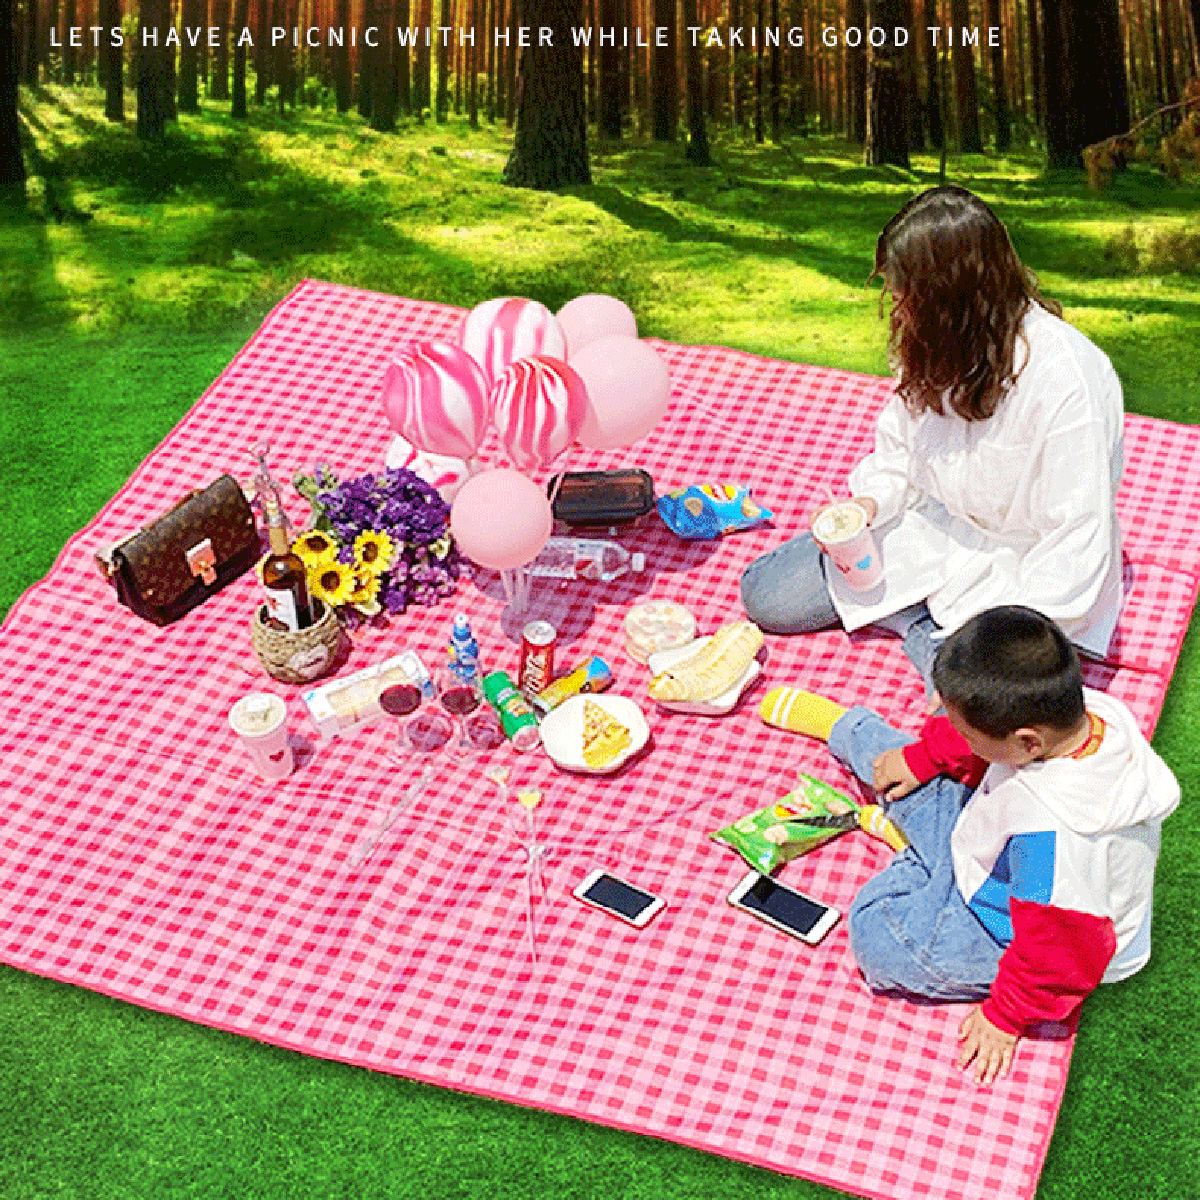 Details about   Picnic Mat 180x150cm Waterproof Play Plaid Blanket Foldable Camping Sleeping Pad 